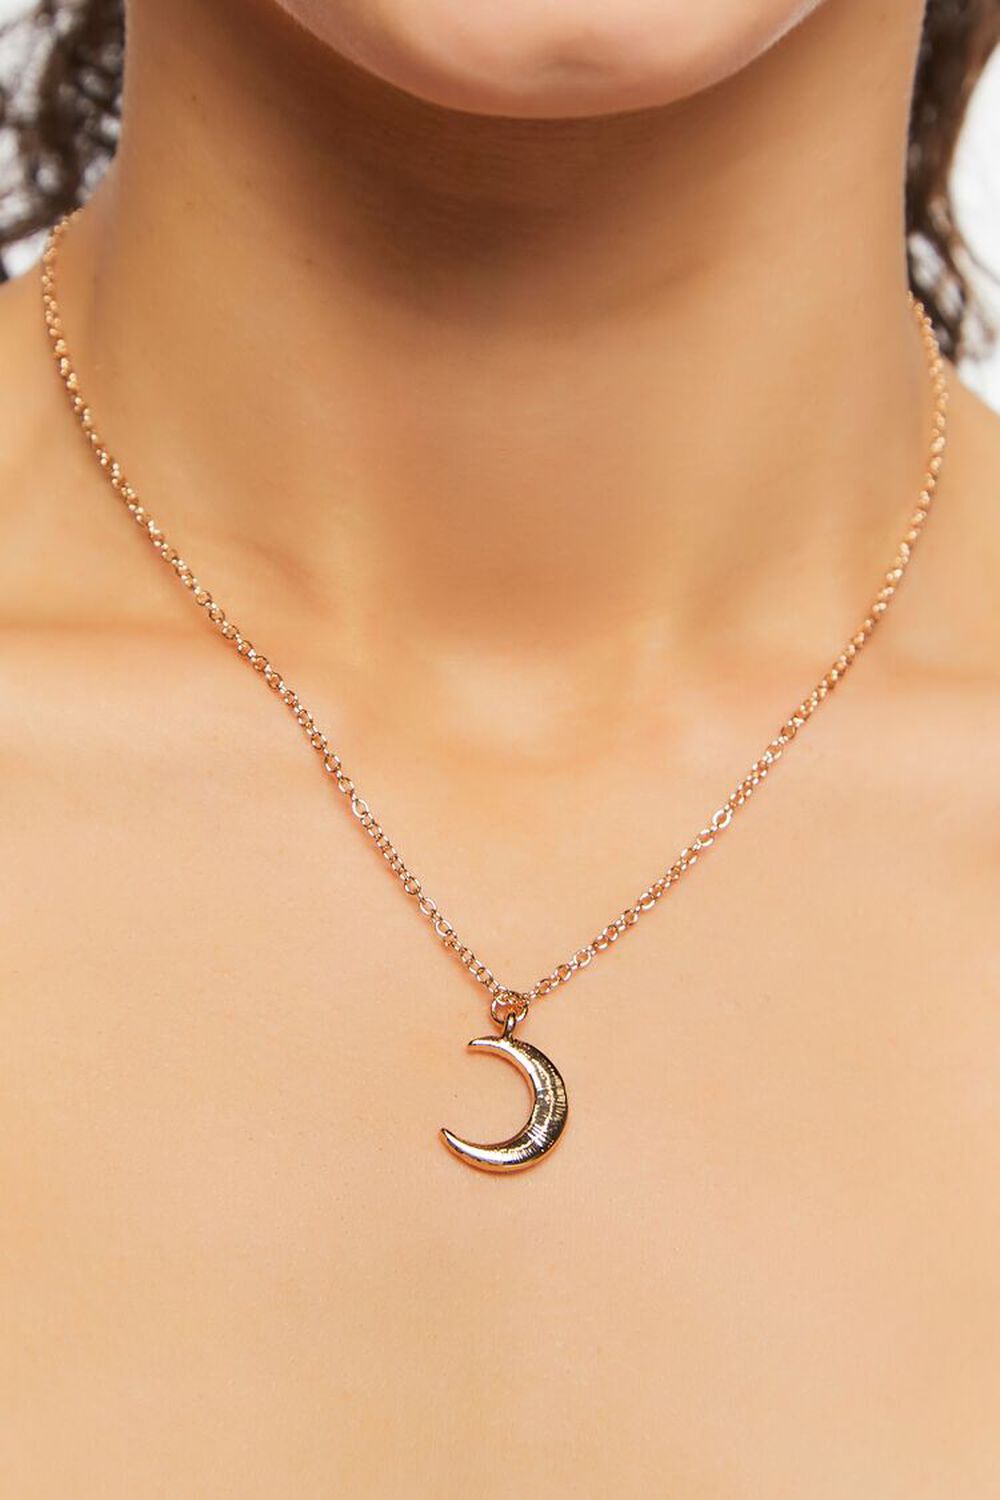 GOLD/CLEAR Crescent Moon Pendant Necklace, image 1